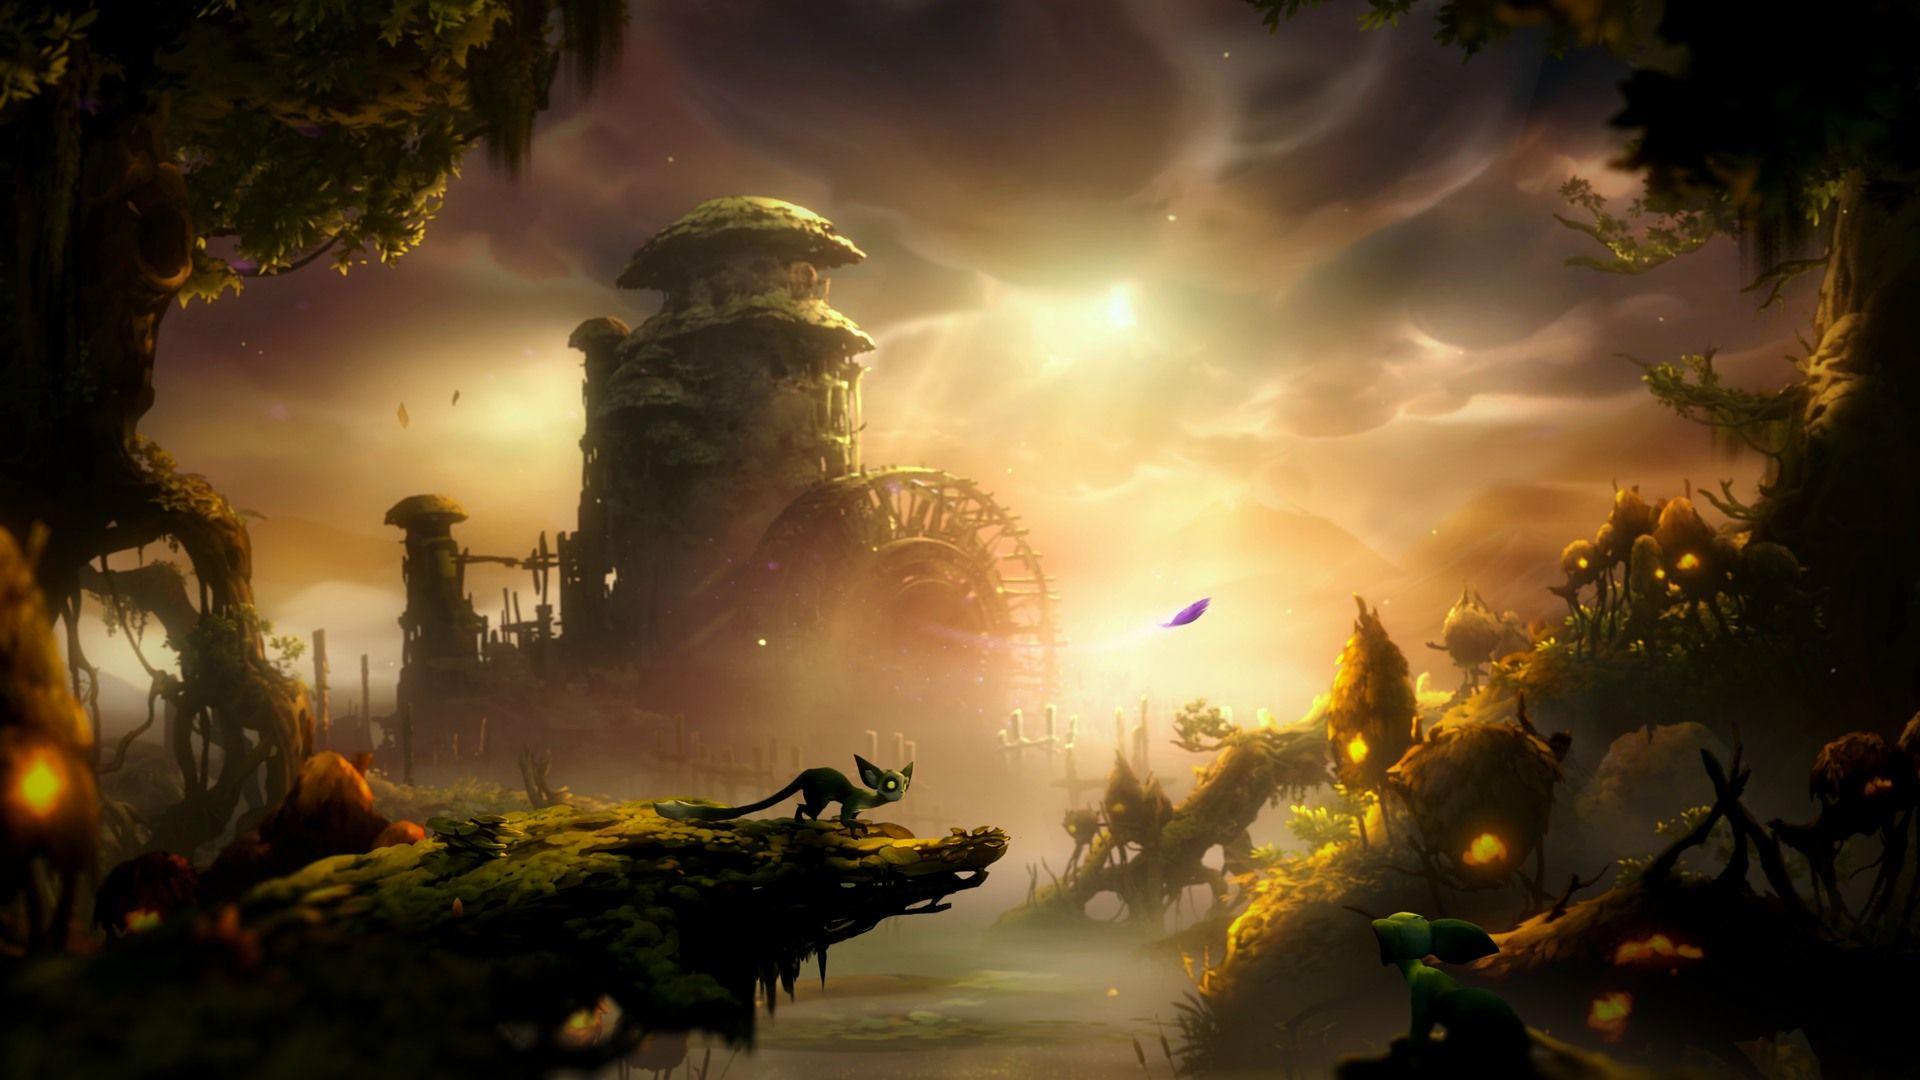 Mill in the magic forest, wallpaper from Ori and the Blind Forest